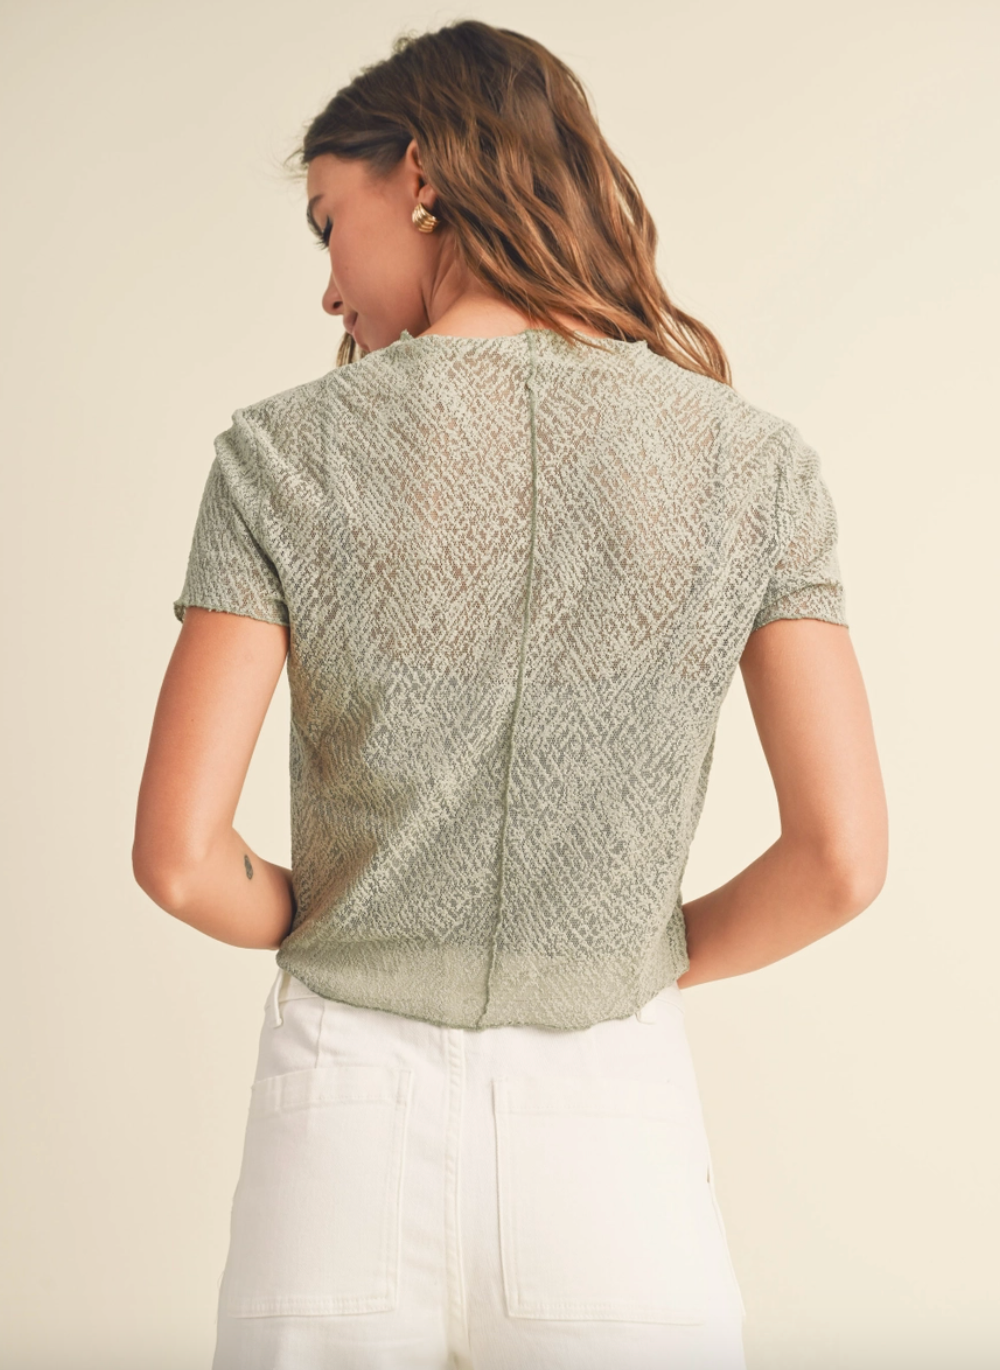 sage it ain't so textured top